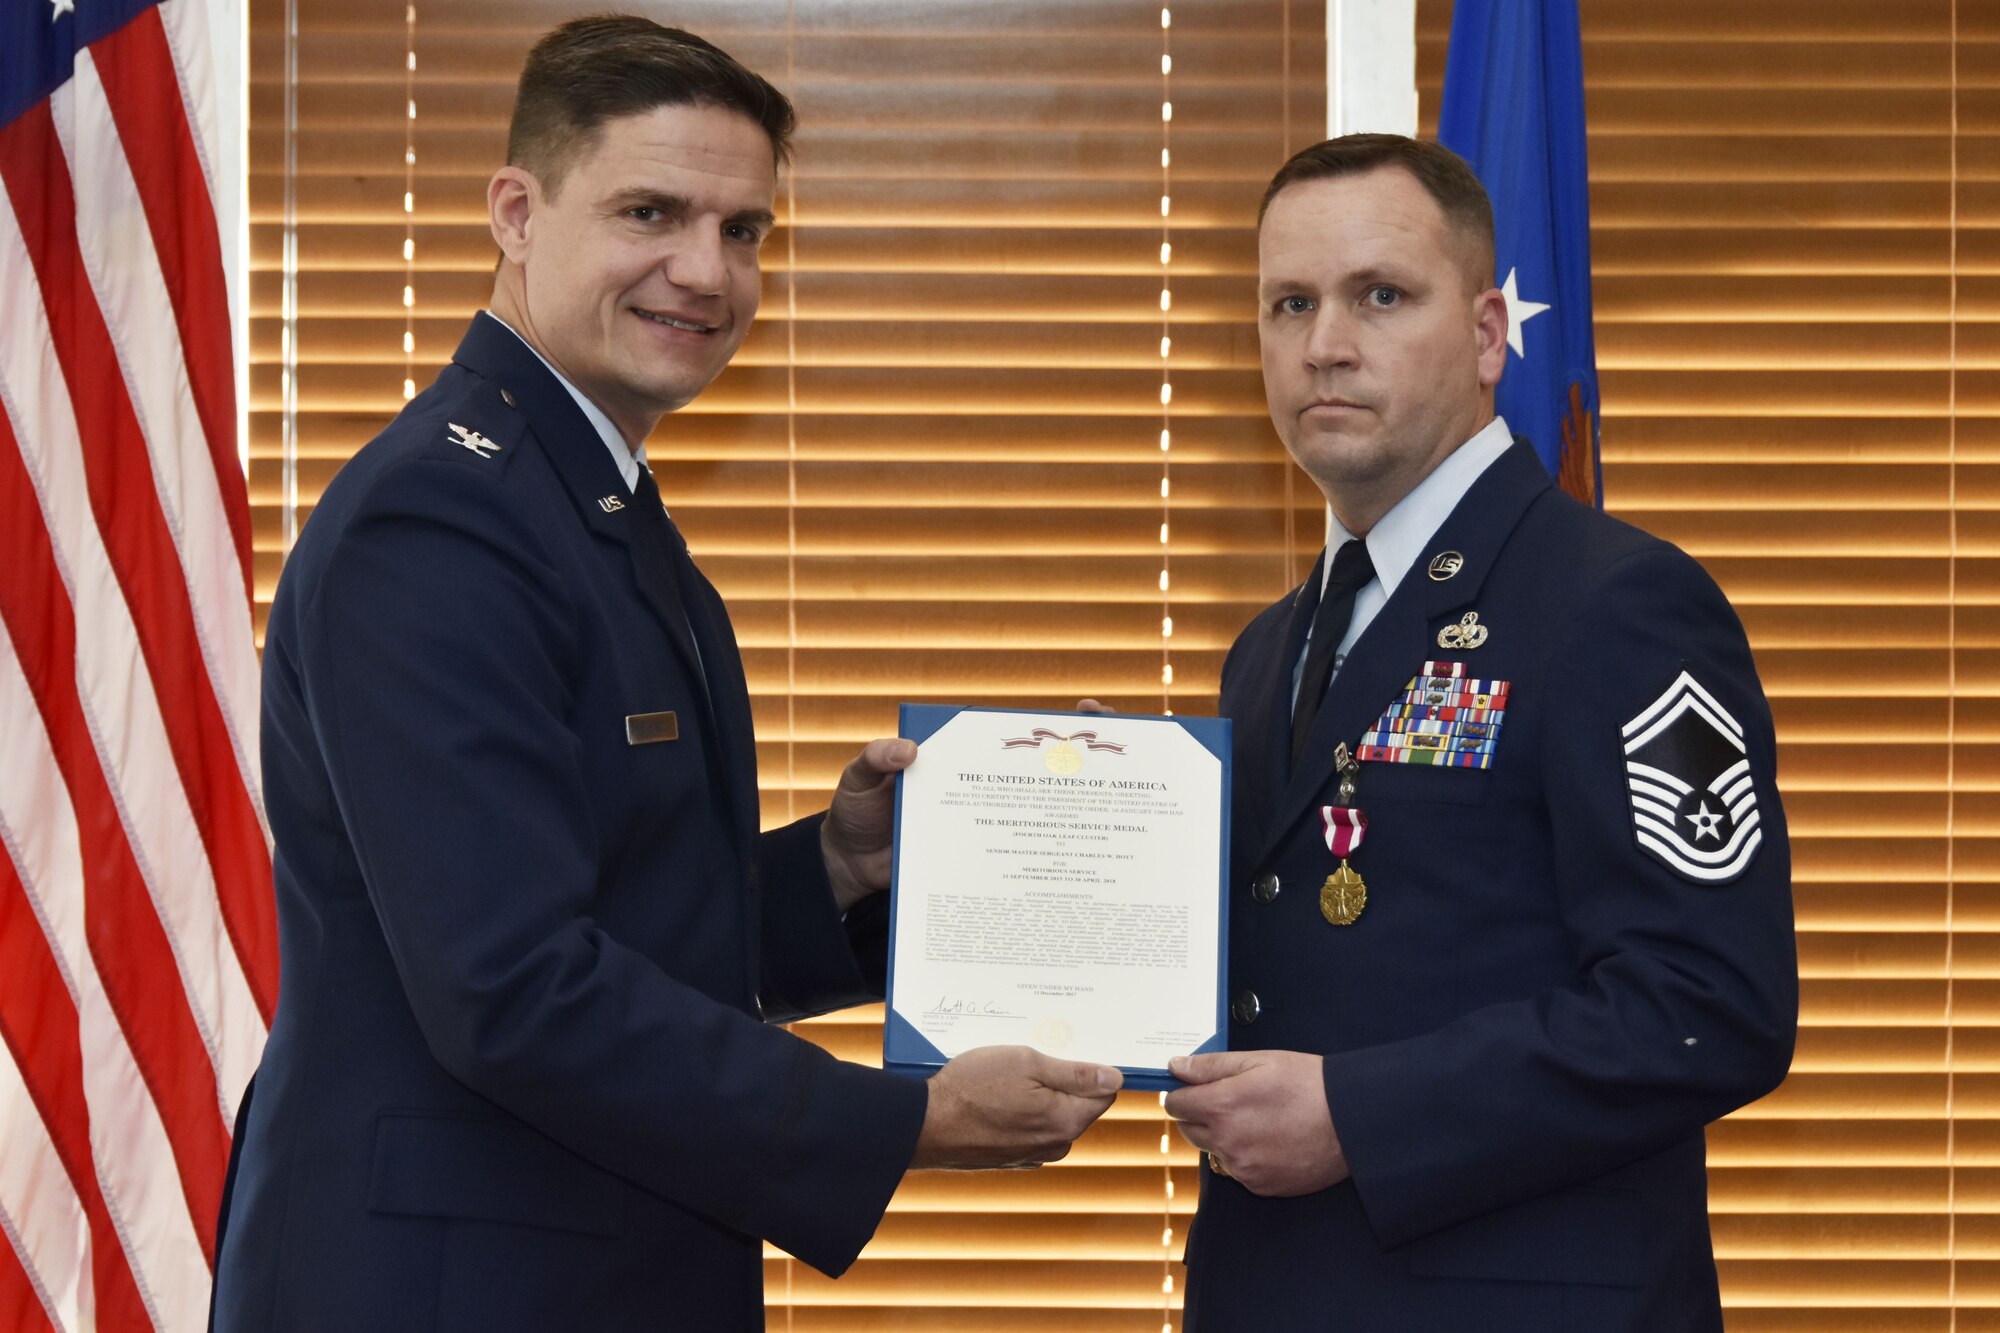 During his retirement ceremony at the Arnold Lakeside Center Jan. 19, Senior Master Sgt. Charles Hoyt, right, receives the Meritorious Service Medal for meritorious service from retired Col. Rodney Todaro. Hoyt retired after serving as the Arnold Air Force Base Senior Enlisted Leader since September 2015. As Senior Enlisted Leader, he advised the commander on training, readiness, effective utilization and development of all Airmen. He ensured that Airmen understood and executed the commander's policies. Additionally, he maintained relationships with local civilian community leaders and provided recommendations to the Complex division chiefs and key staff members on behalf of the enlisted force at Arnold AFB. (U.S. Air Force photo/Rick Goodfriend)